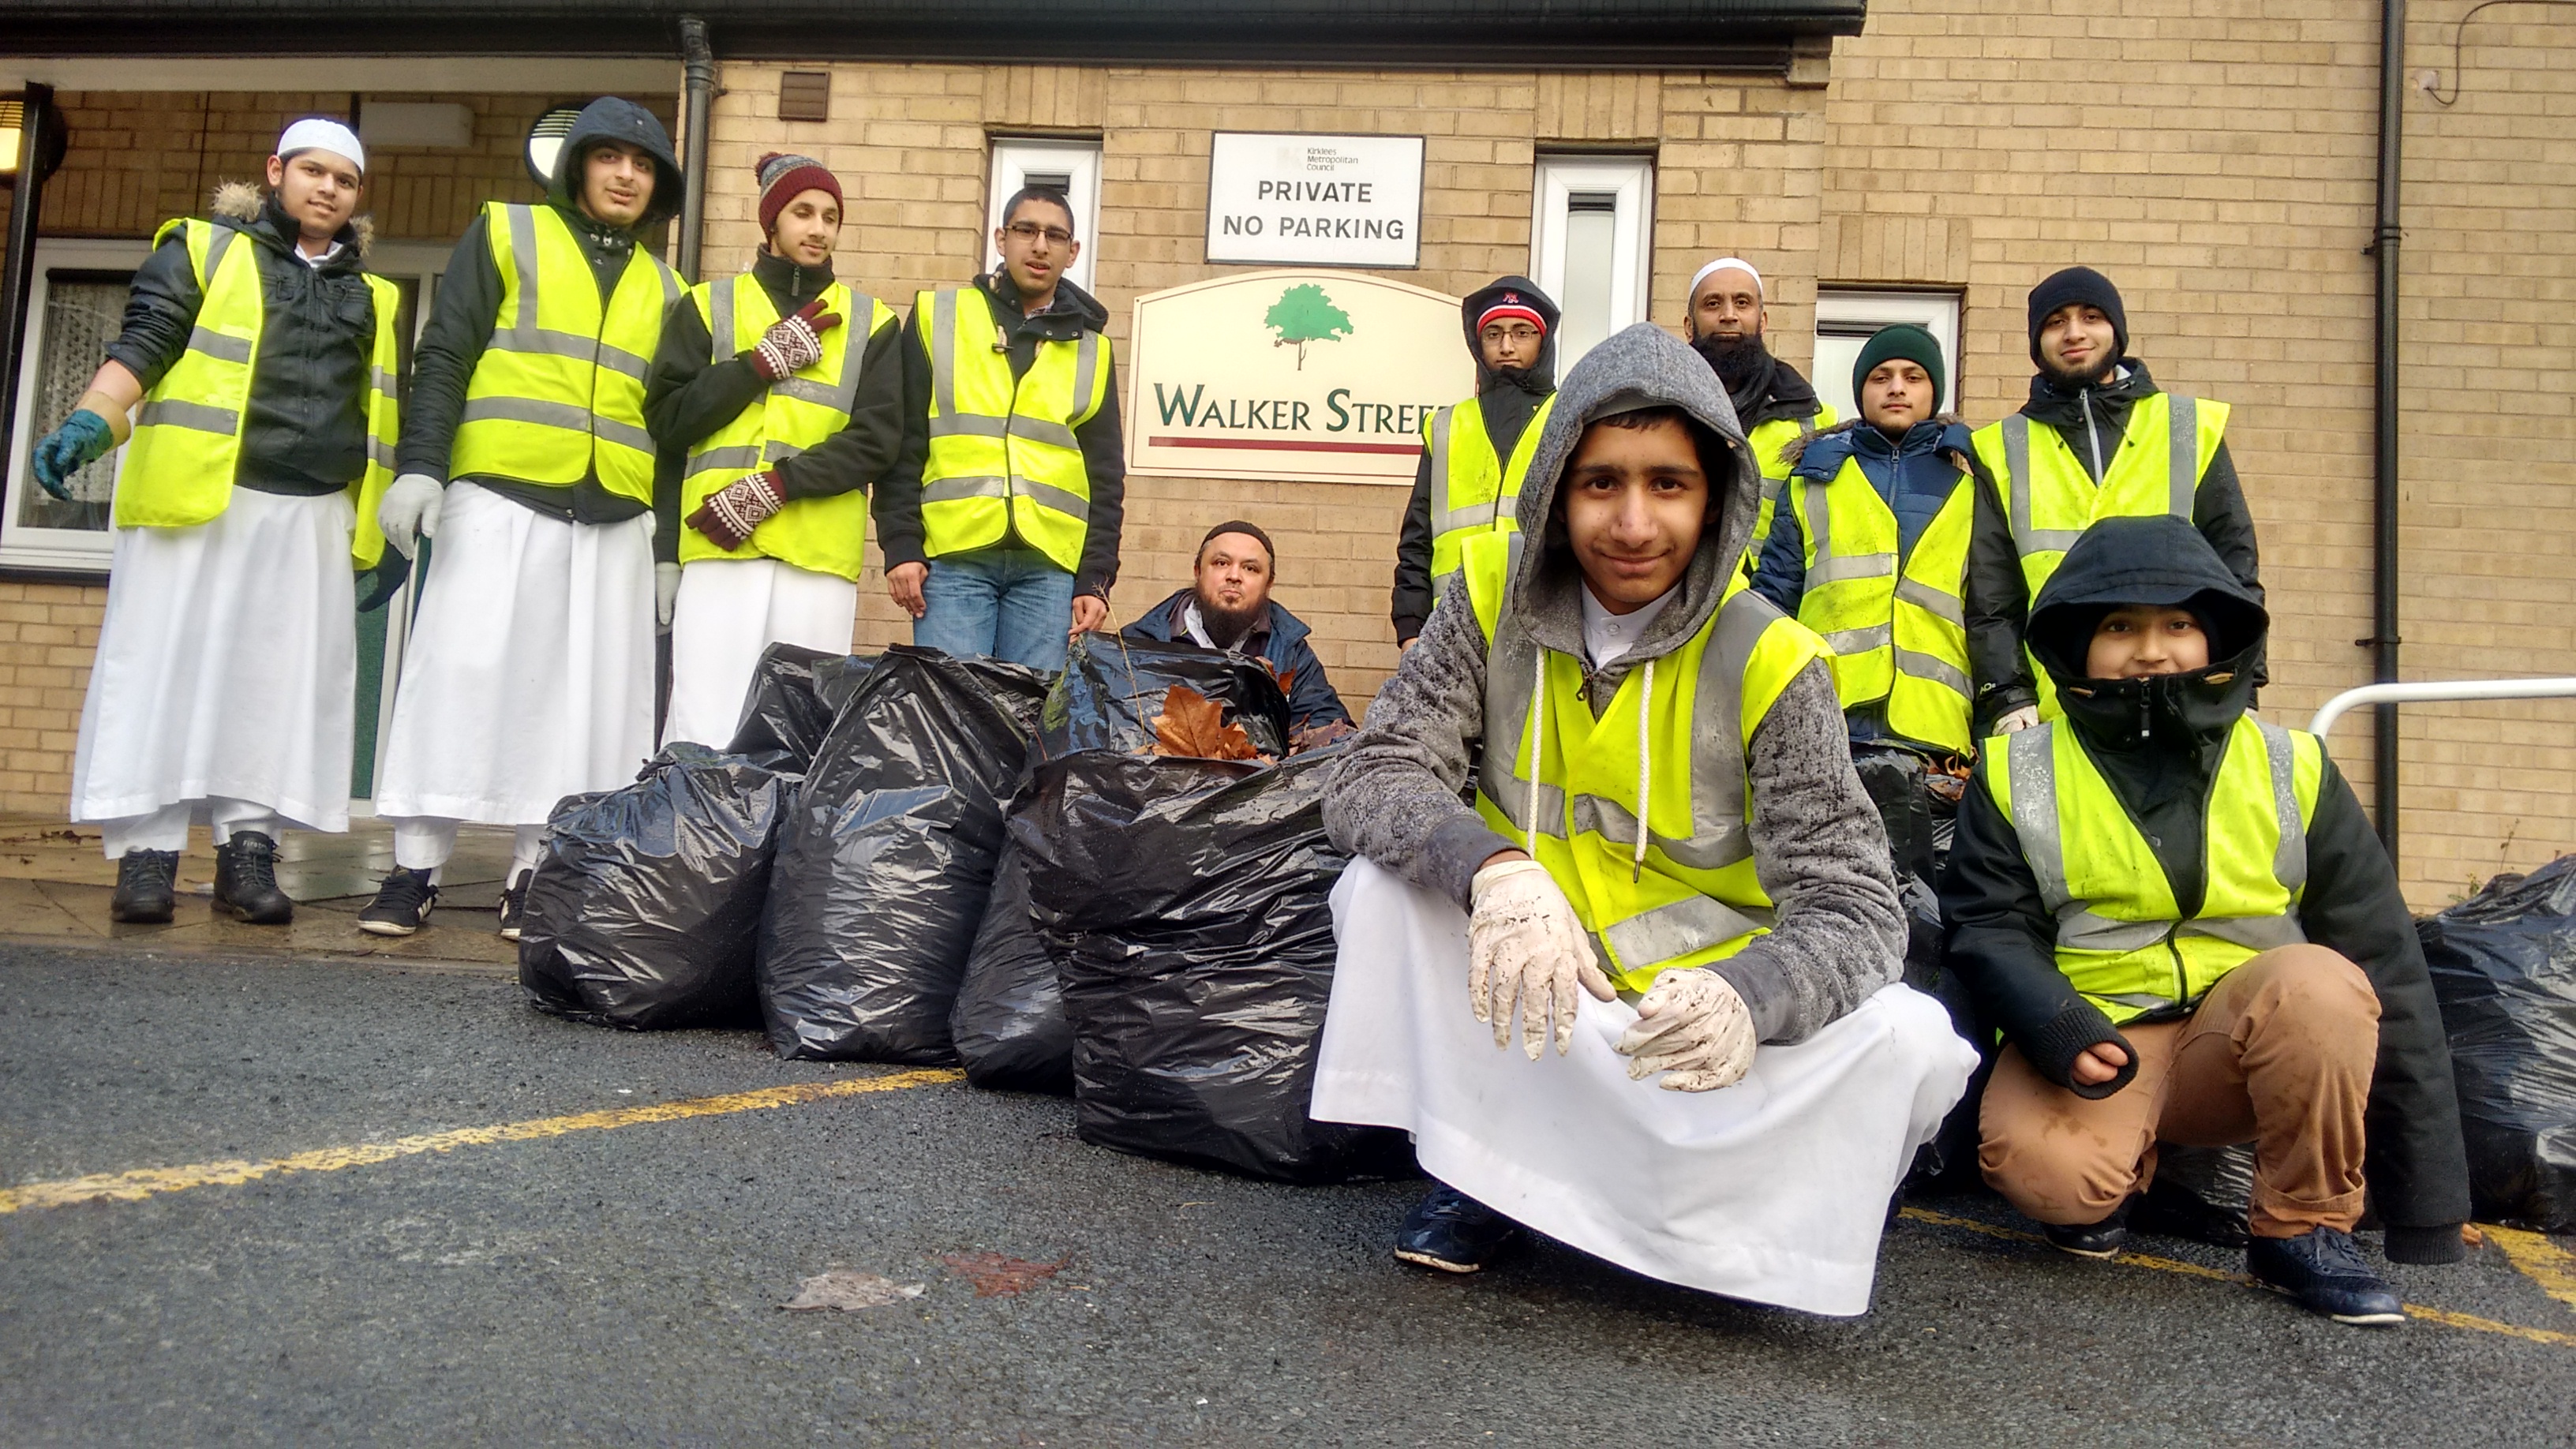 Local Darul Uloom joins youth group to clean up retirement home